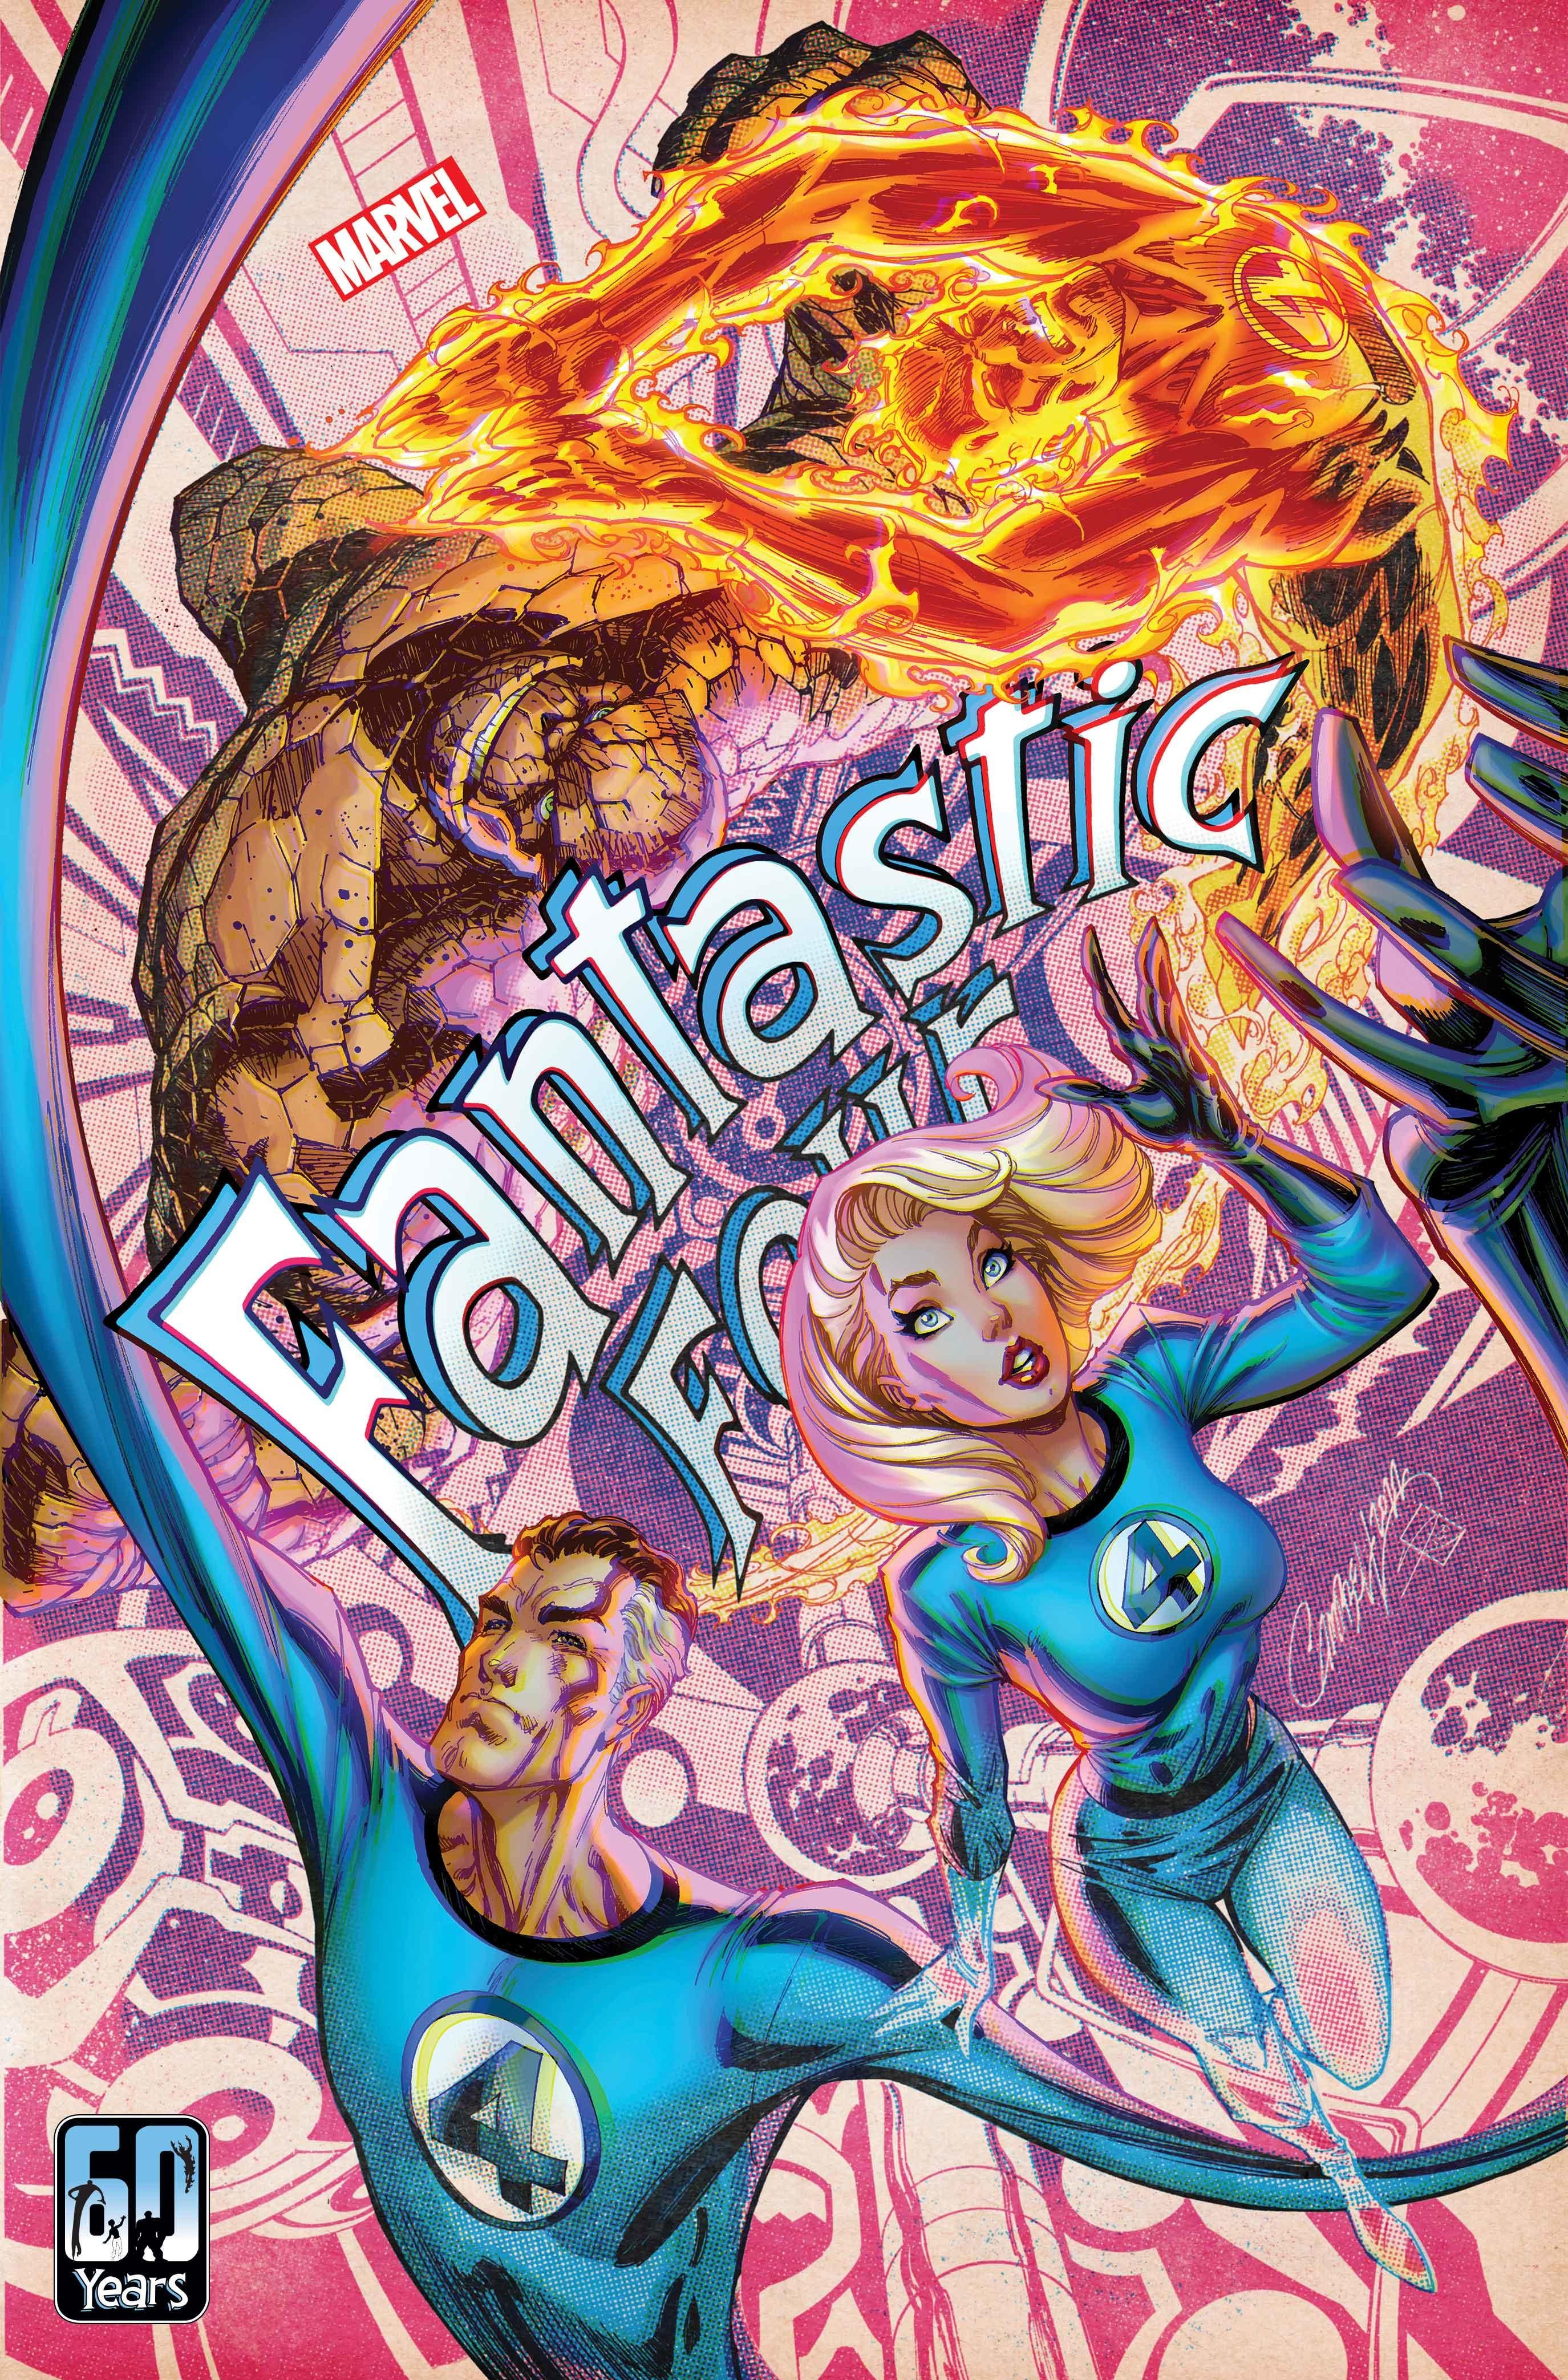 Marvel’s Fantastic Four Relaunch Gets a 60th Anniversary Variant Cover by J. Scott Campbell